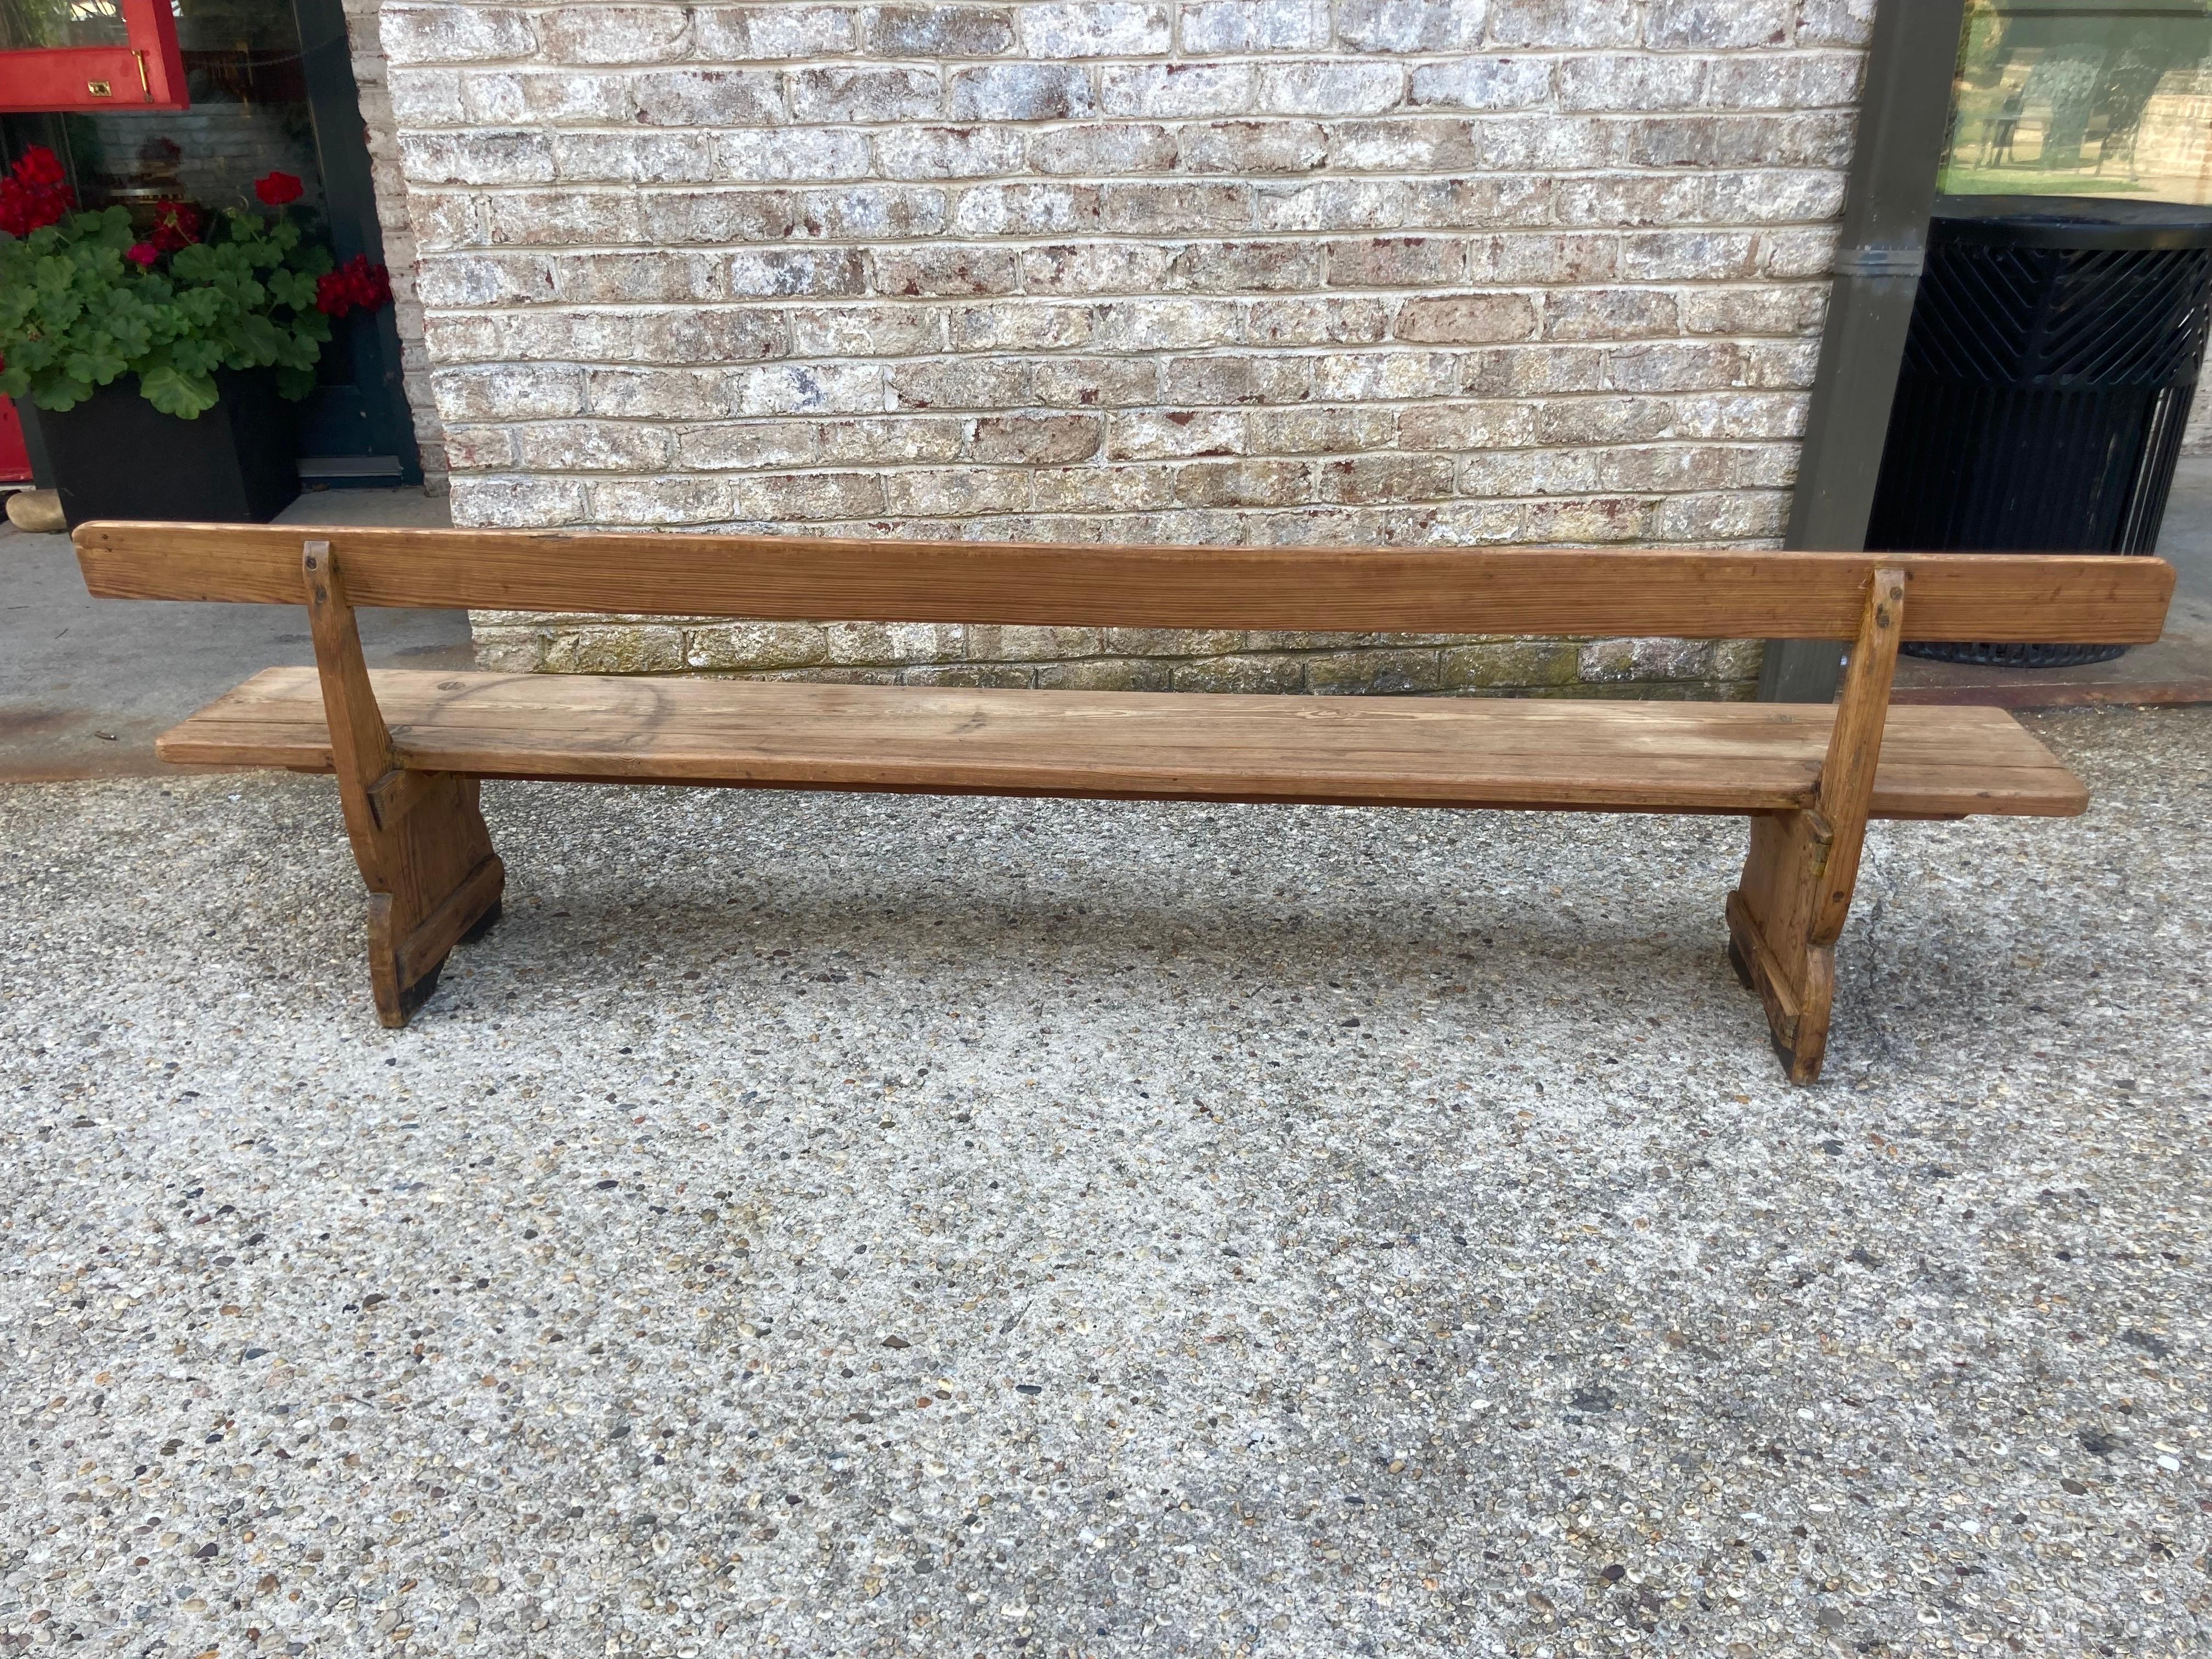 Low French bench with great patina.